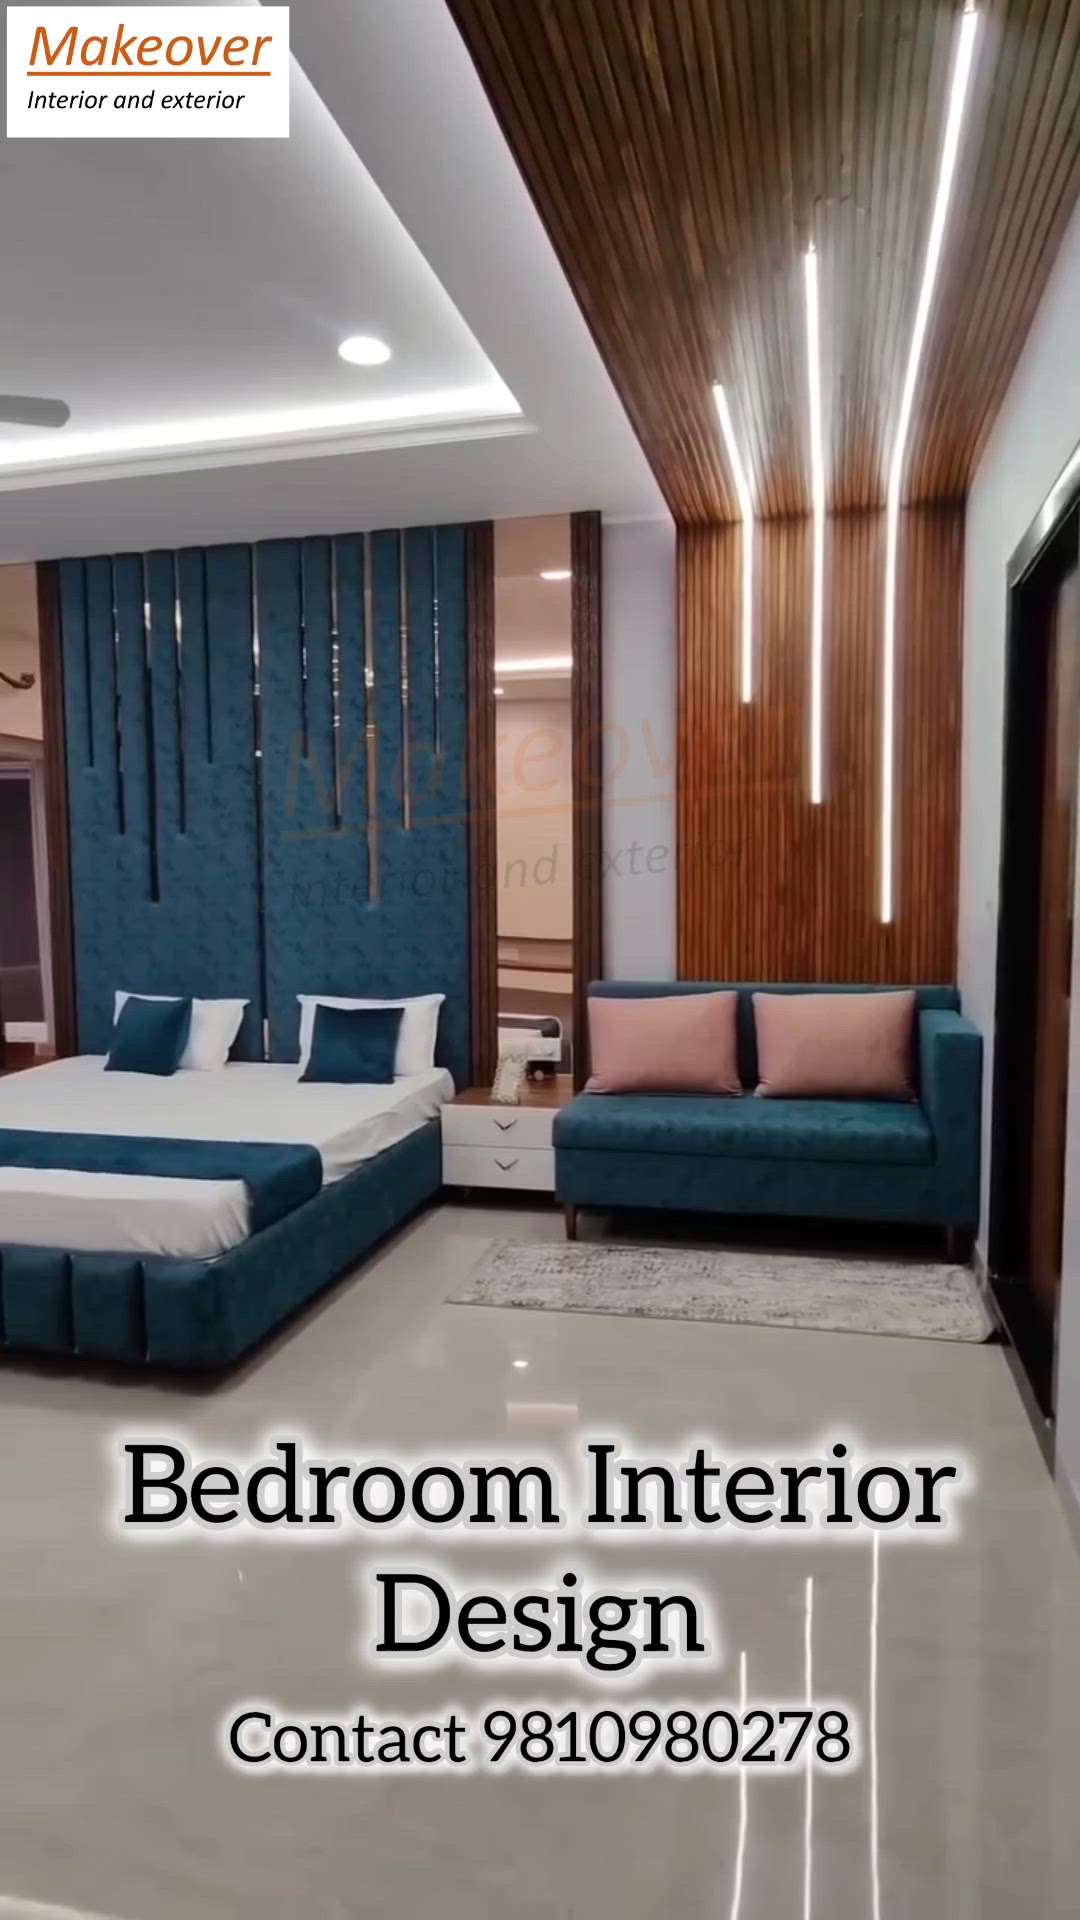 Bedroom Interior Design available in wholesale price any requirement now or in future so please contact us 9810980278/9810980397